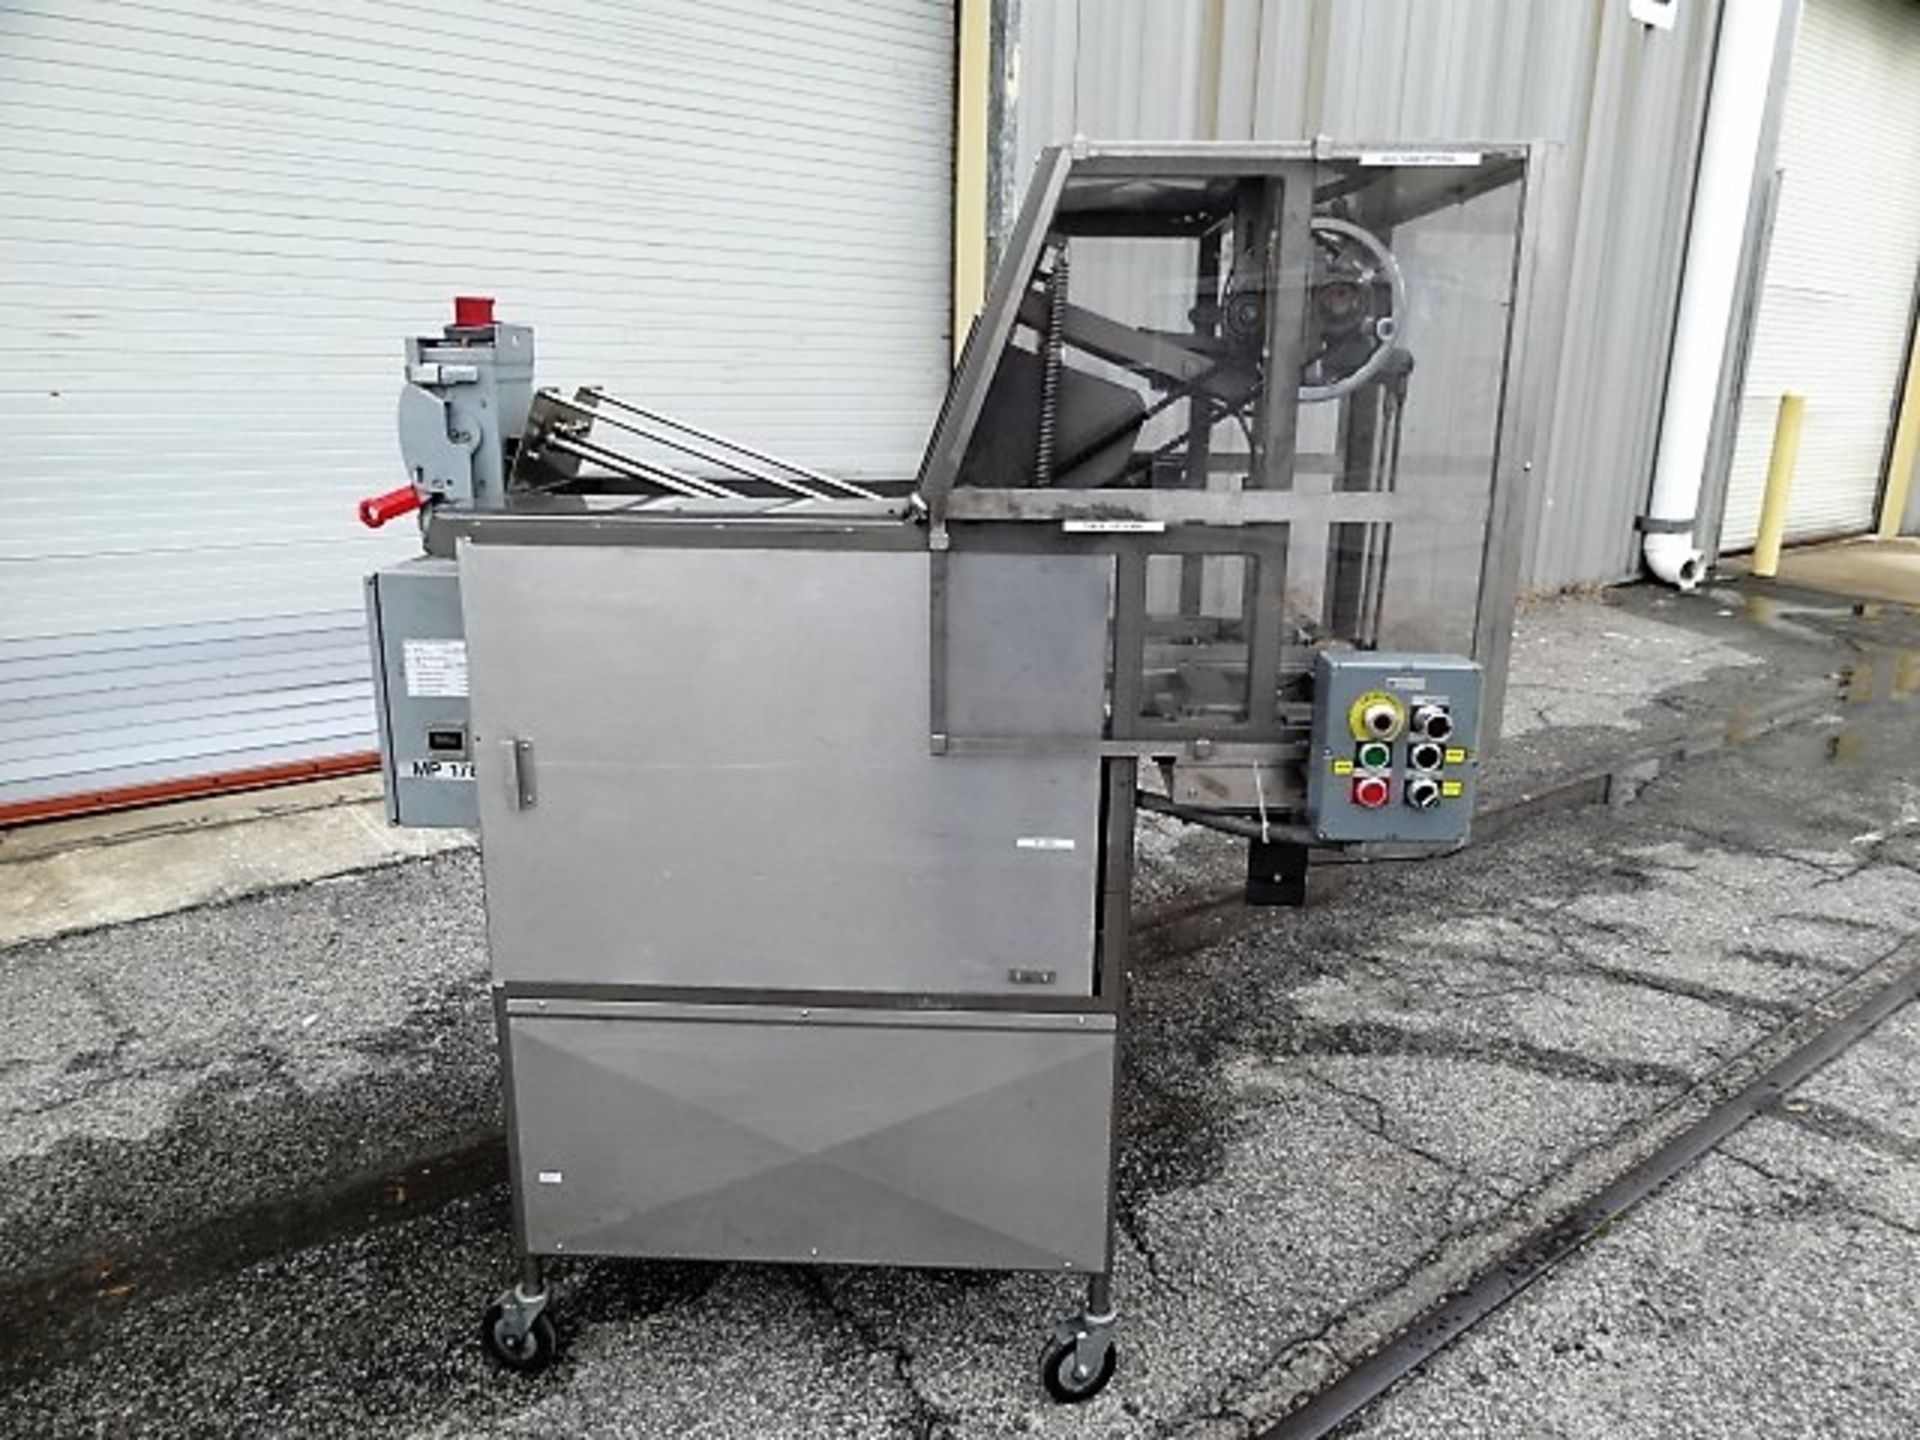 AE RANDLES Tray Former for Self-Locking Trays; Model 16-26 (Located Charleston, SC) - Image 2 of 4